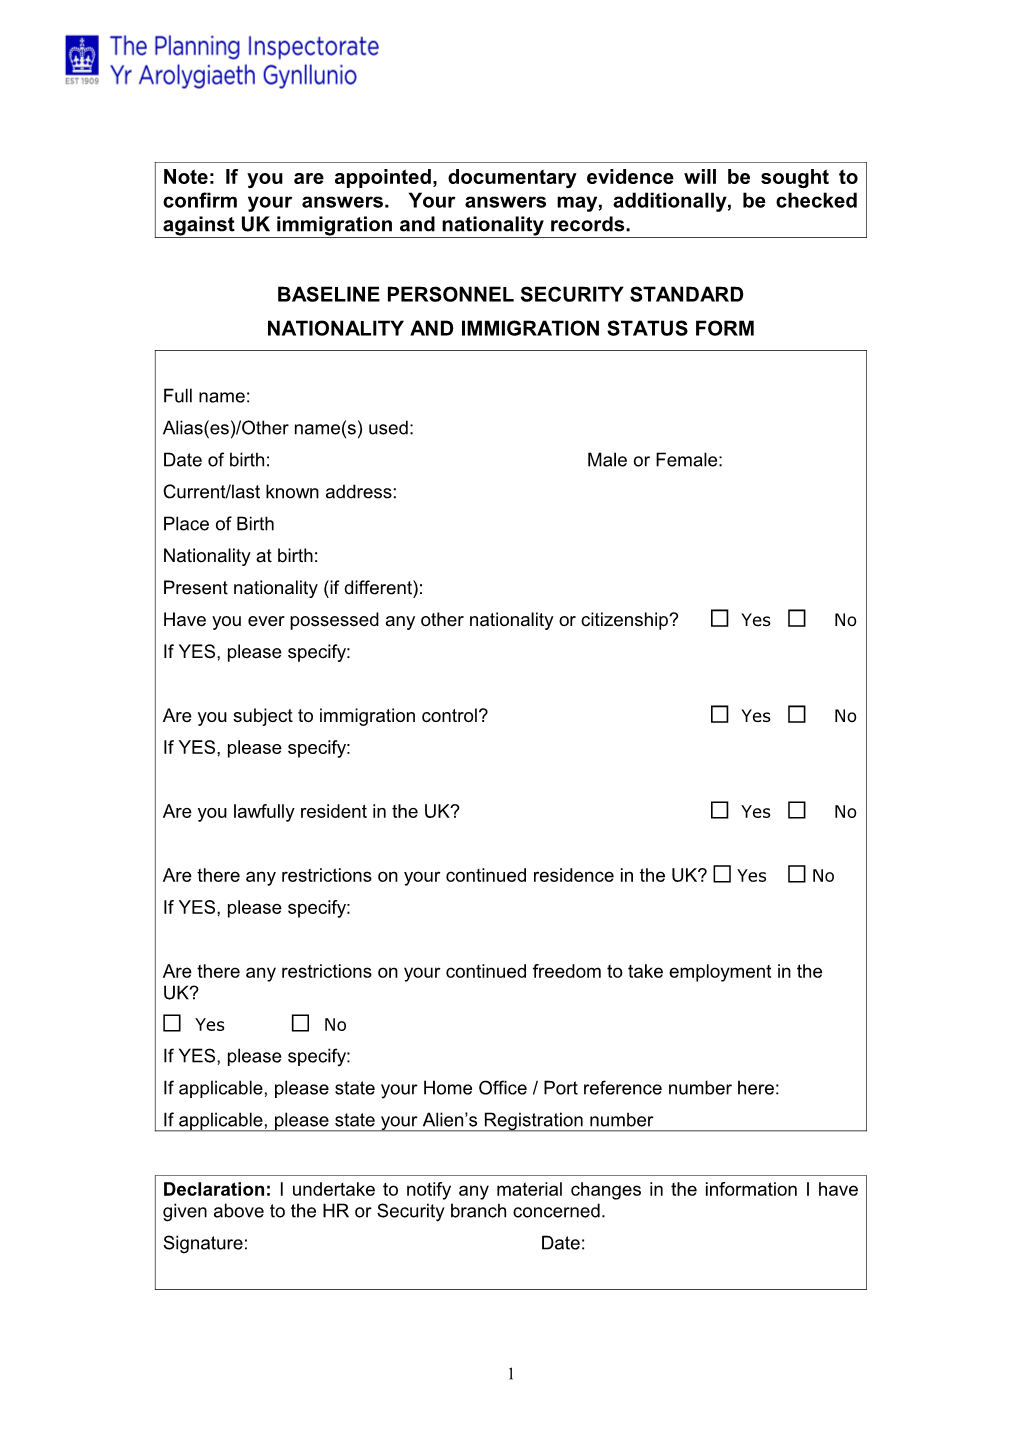 Nationality and Immigration Status Form